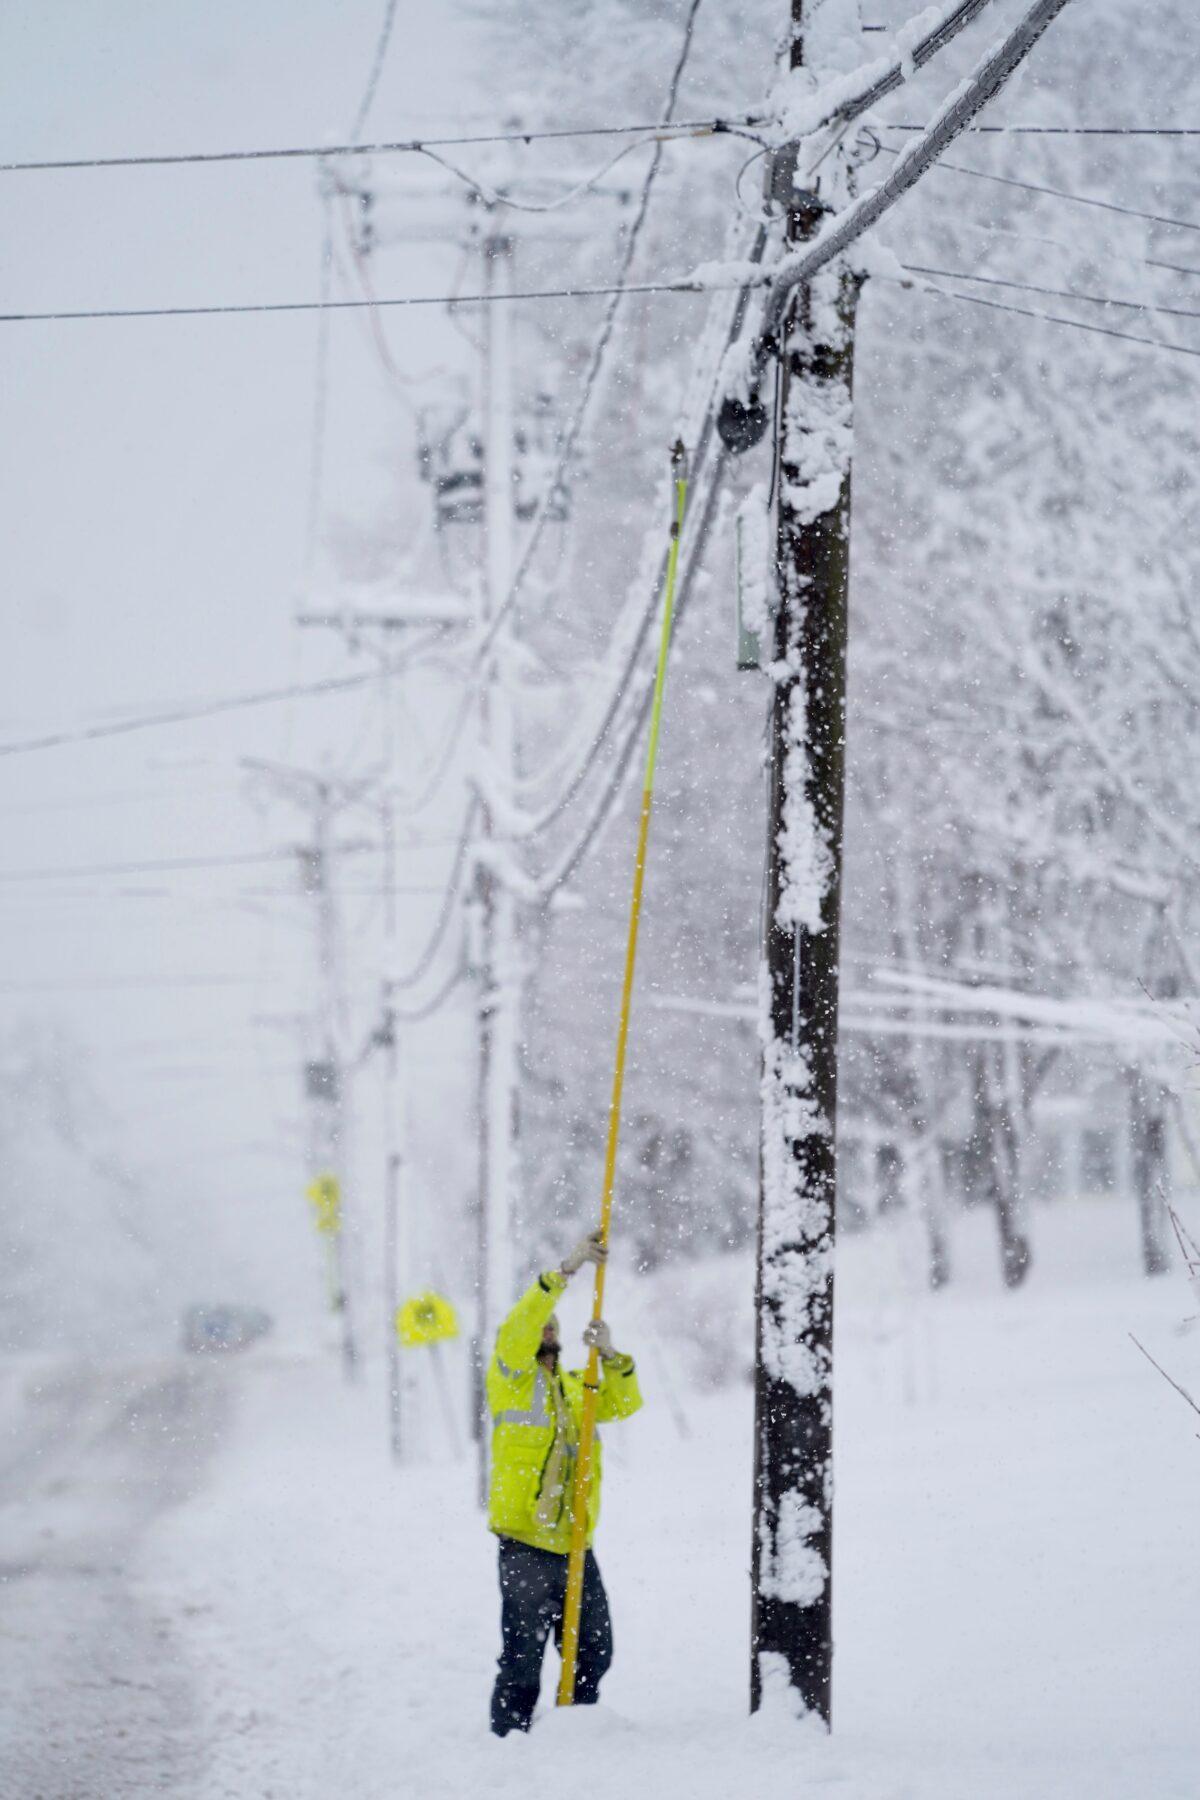 A contractor for Eversource uses a fiberglass pole to replace a fuse that broke, in Pittsfield, Mass., on March 14, 2023. (Ben Garver/The Berkshire Eagle via AP)